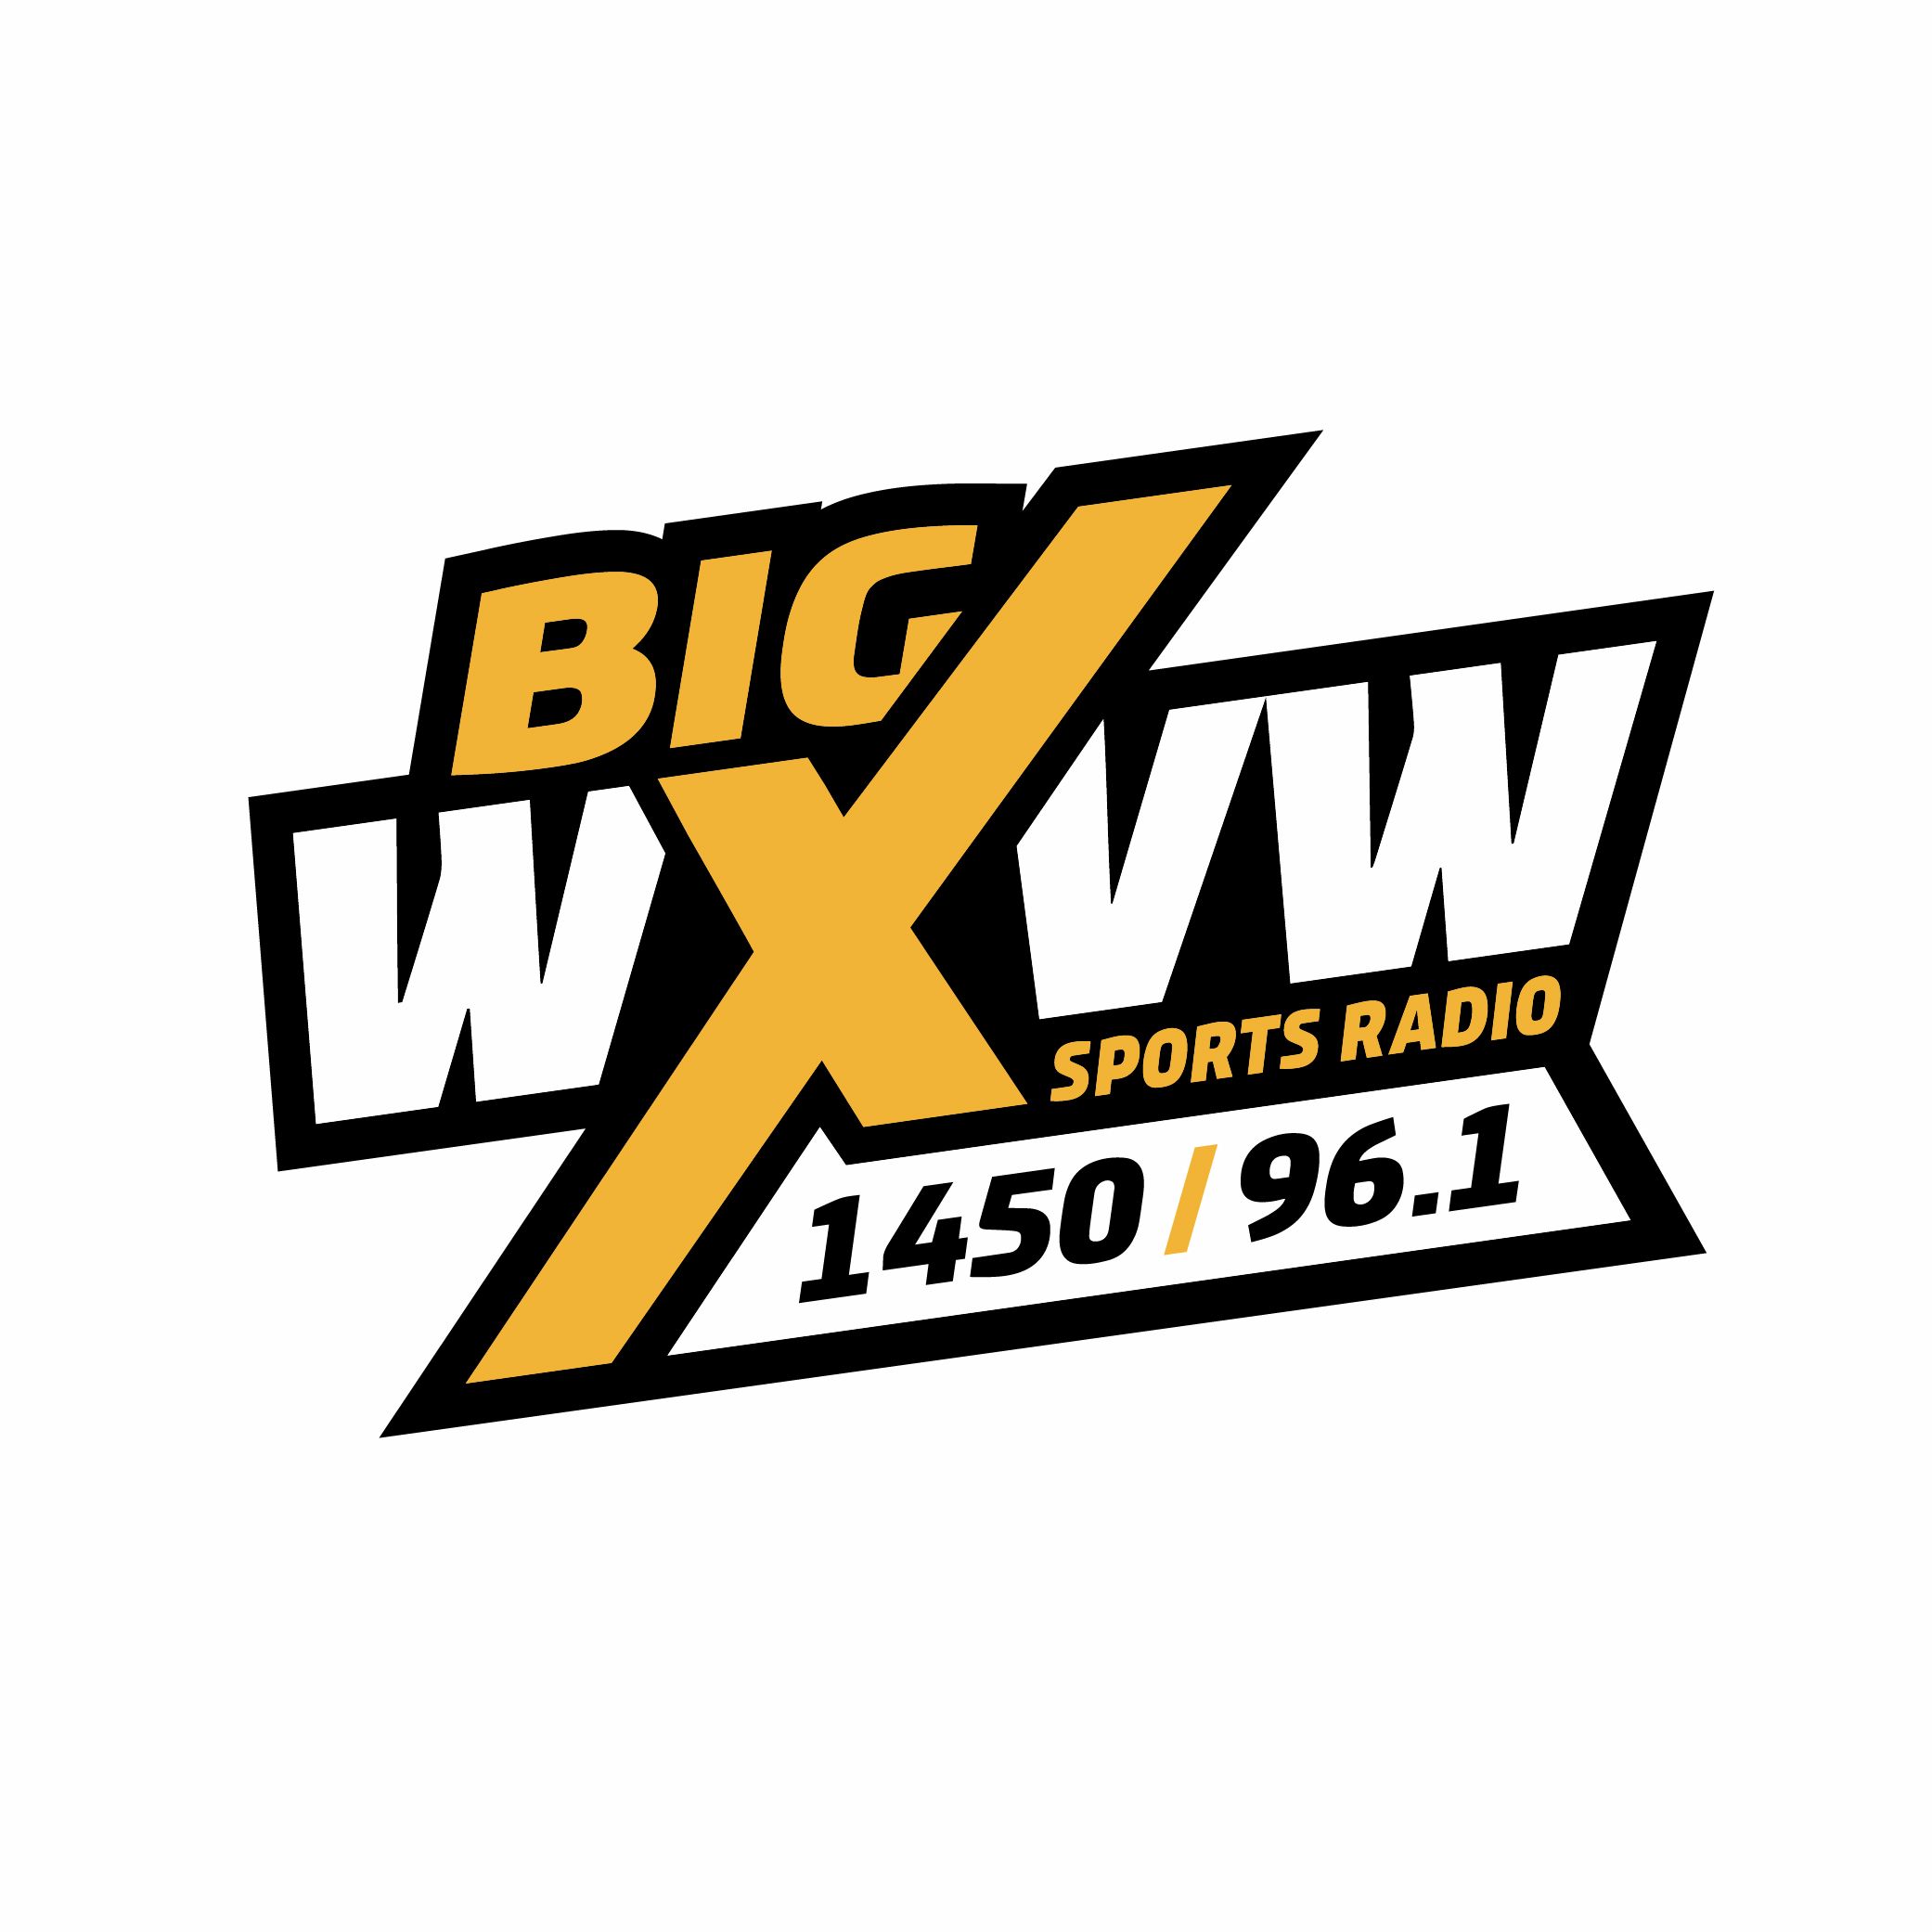 Stream Big X Sports Radio 1450/96.1 WXVW music | Listen to songs, albums,  playlists for free on SoundCloud